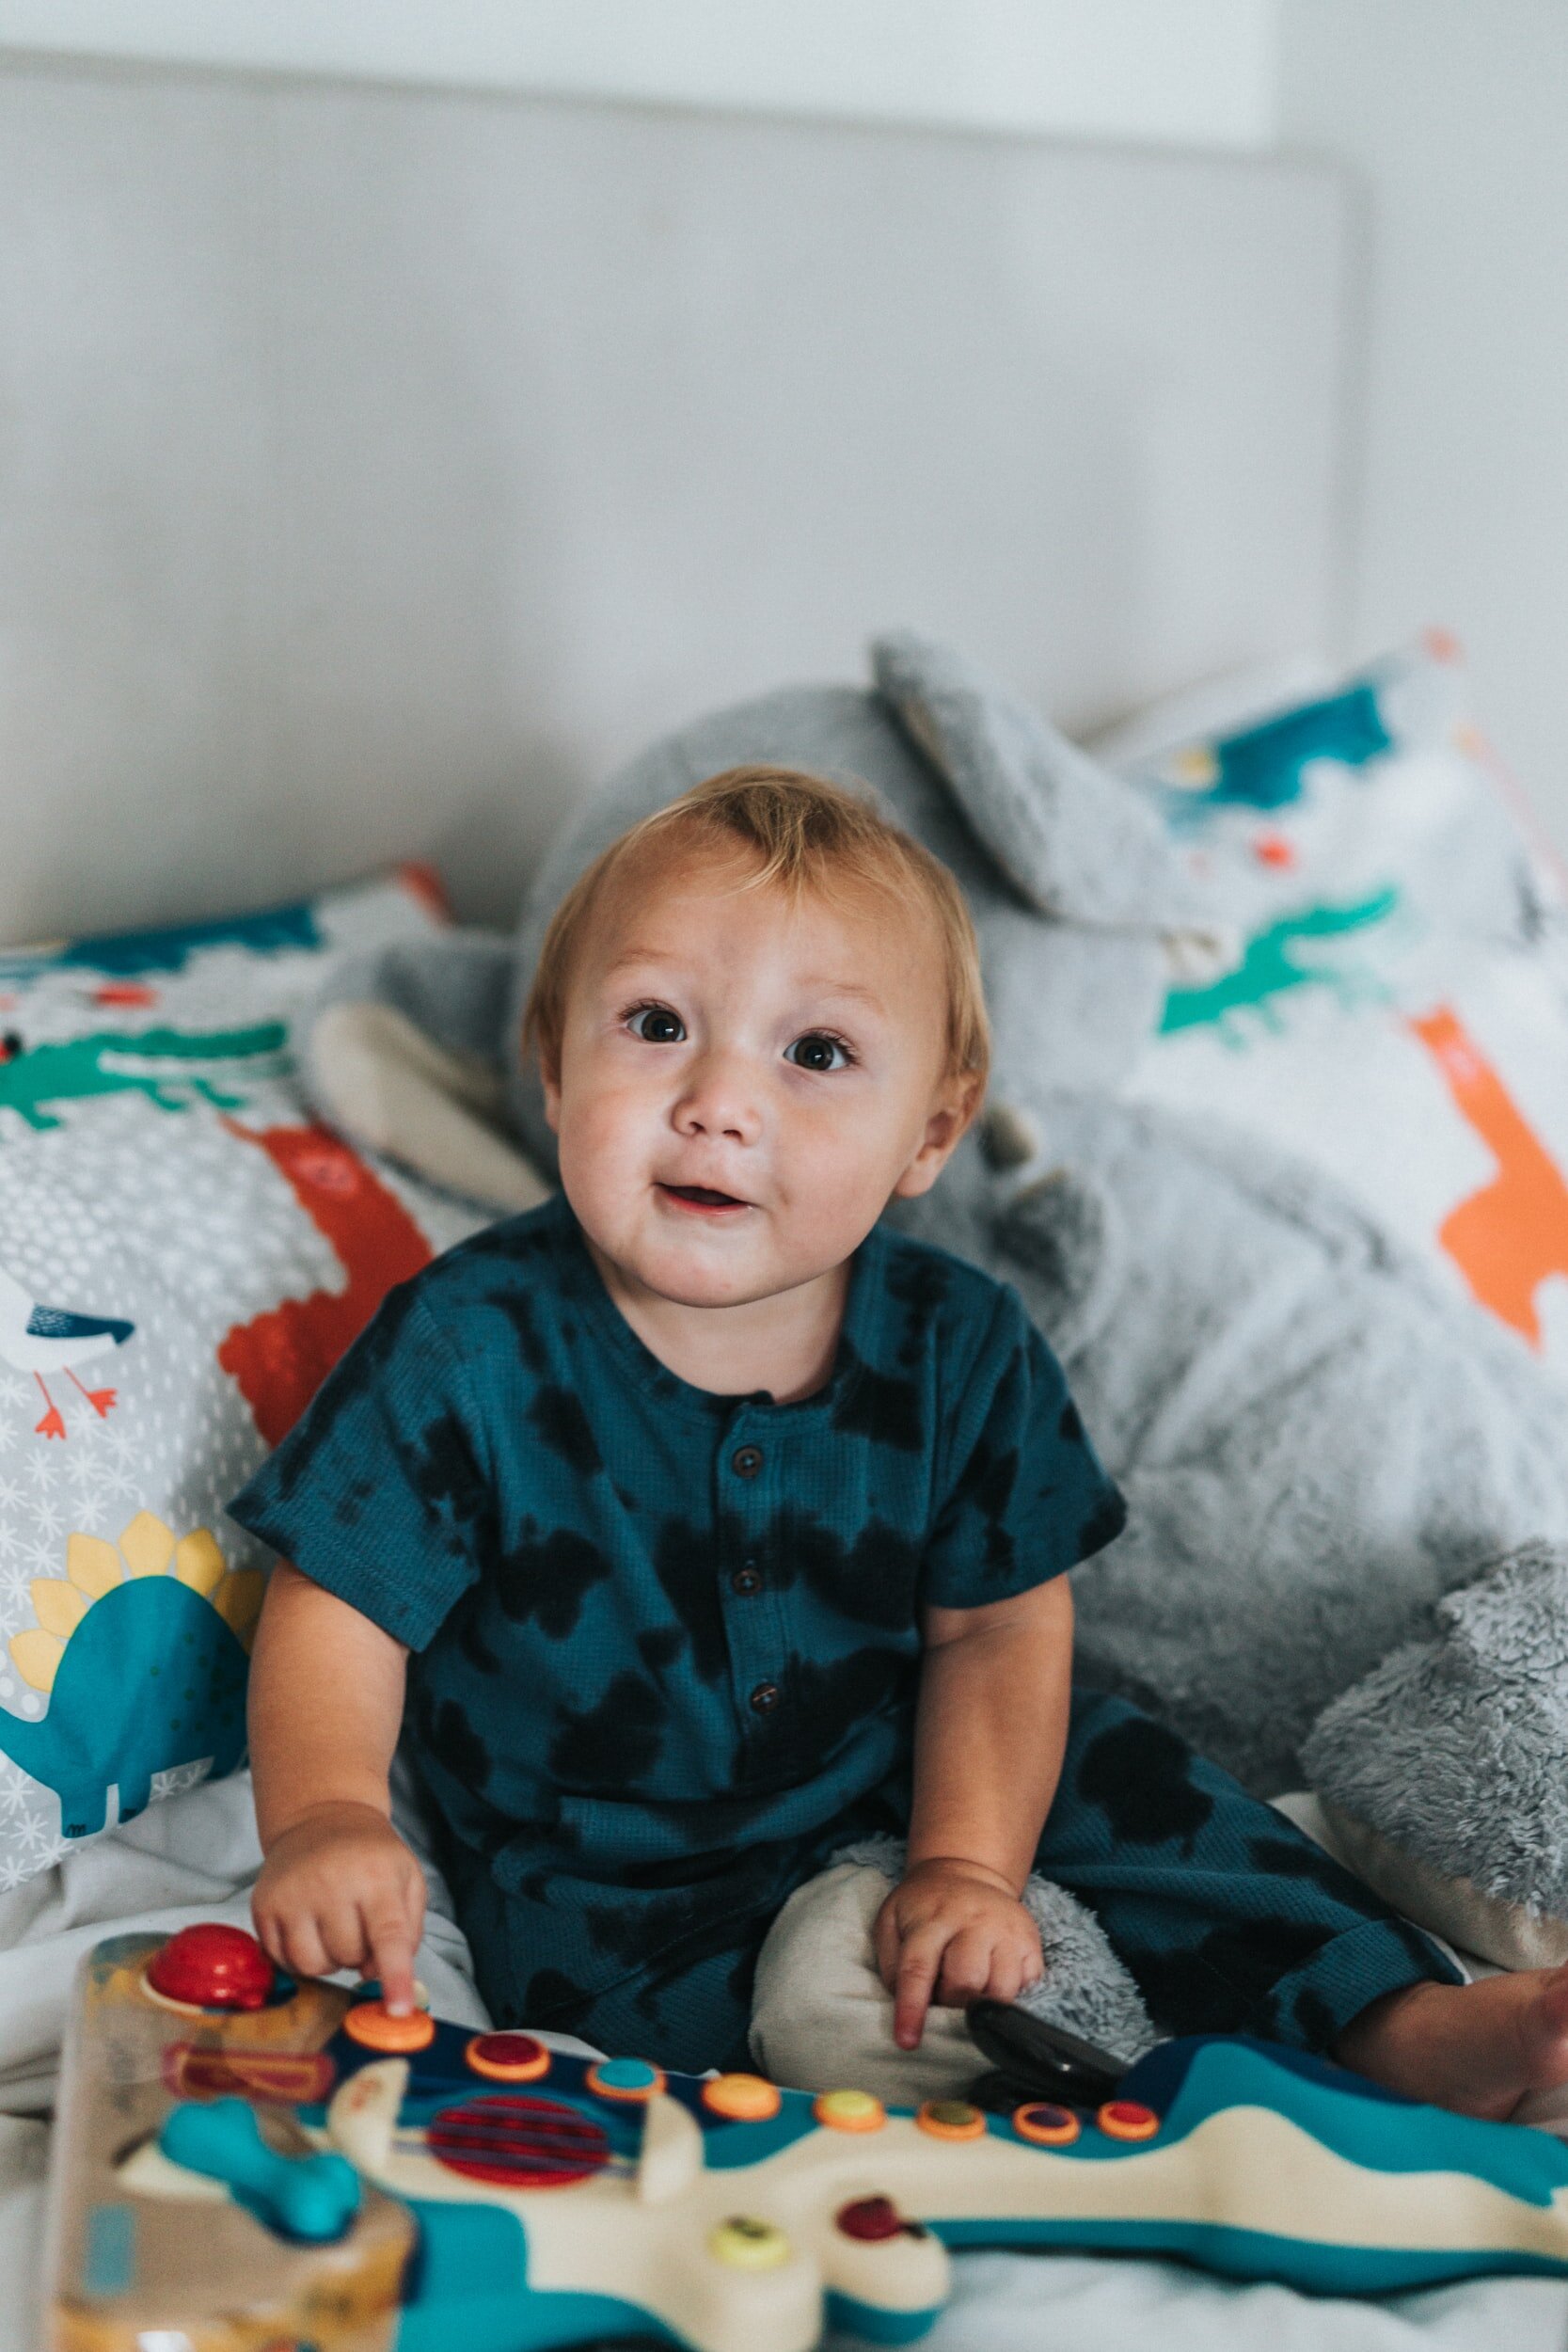 When And How To Transition To A Big Kid Bed Childhood Sleep Consulting With Nichole Smith